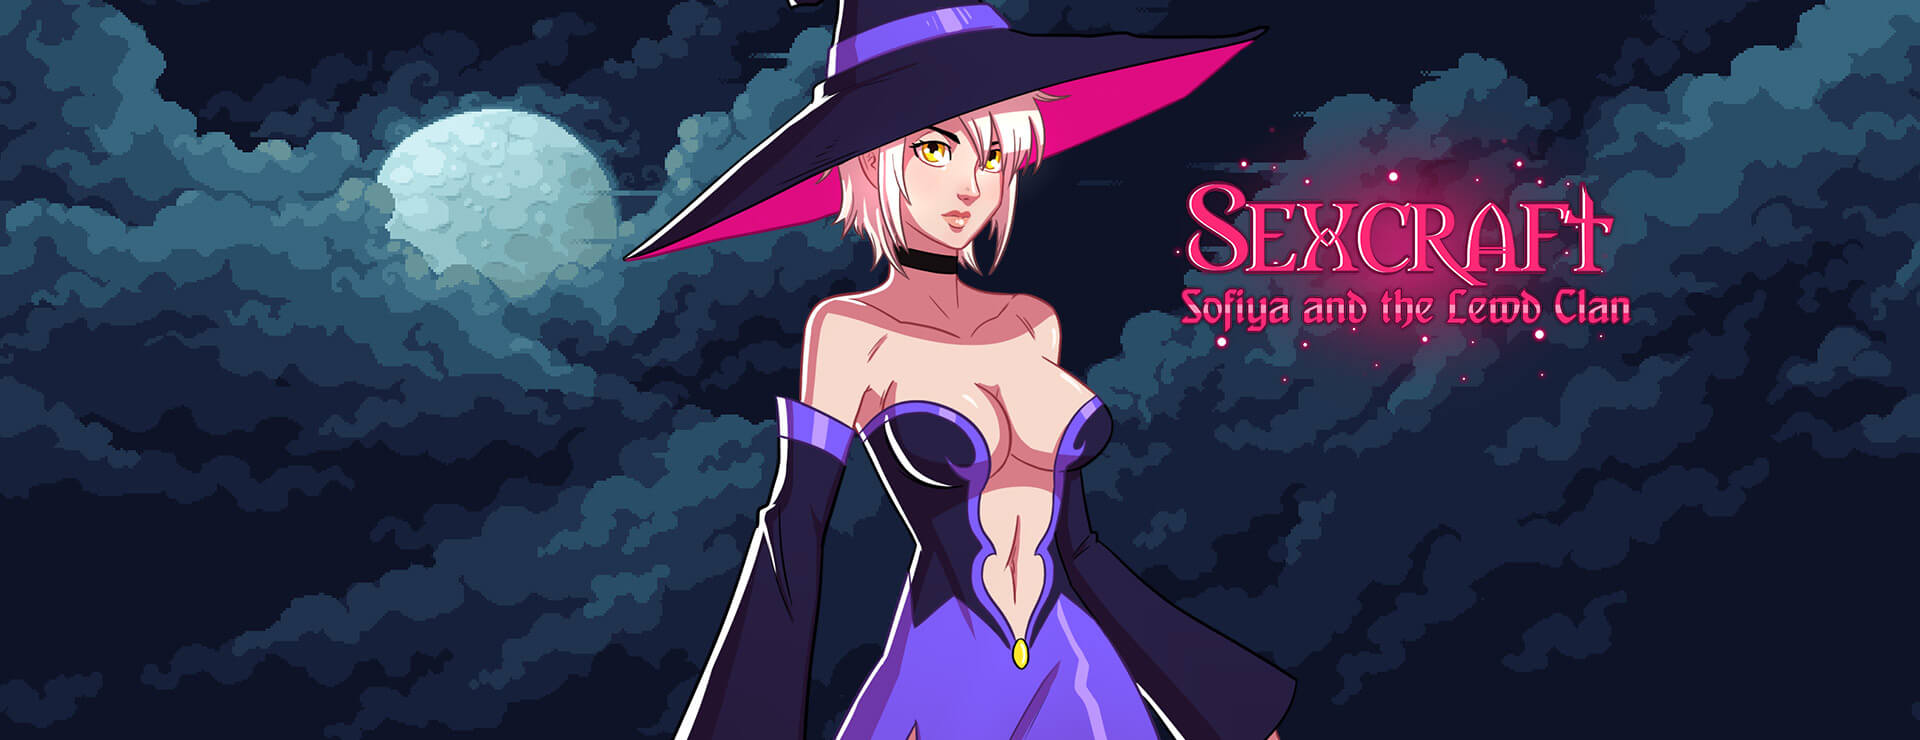 Sexcraft - Sofiya and the Lewd Clan - Action Adventure Spiel